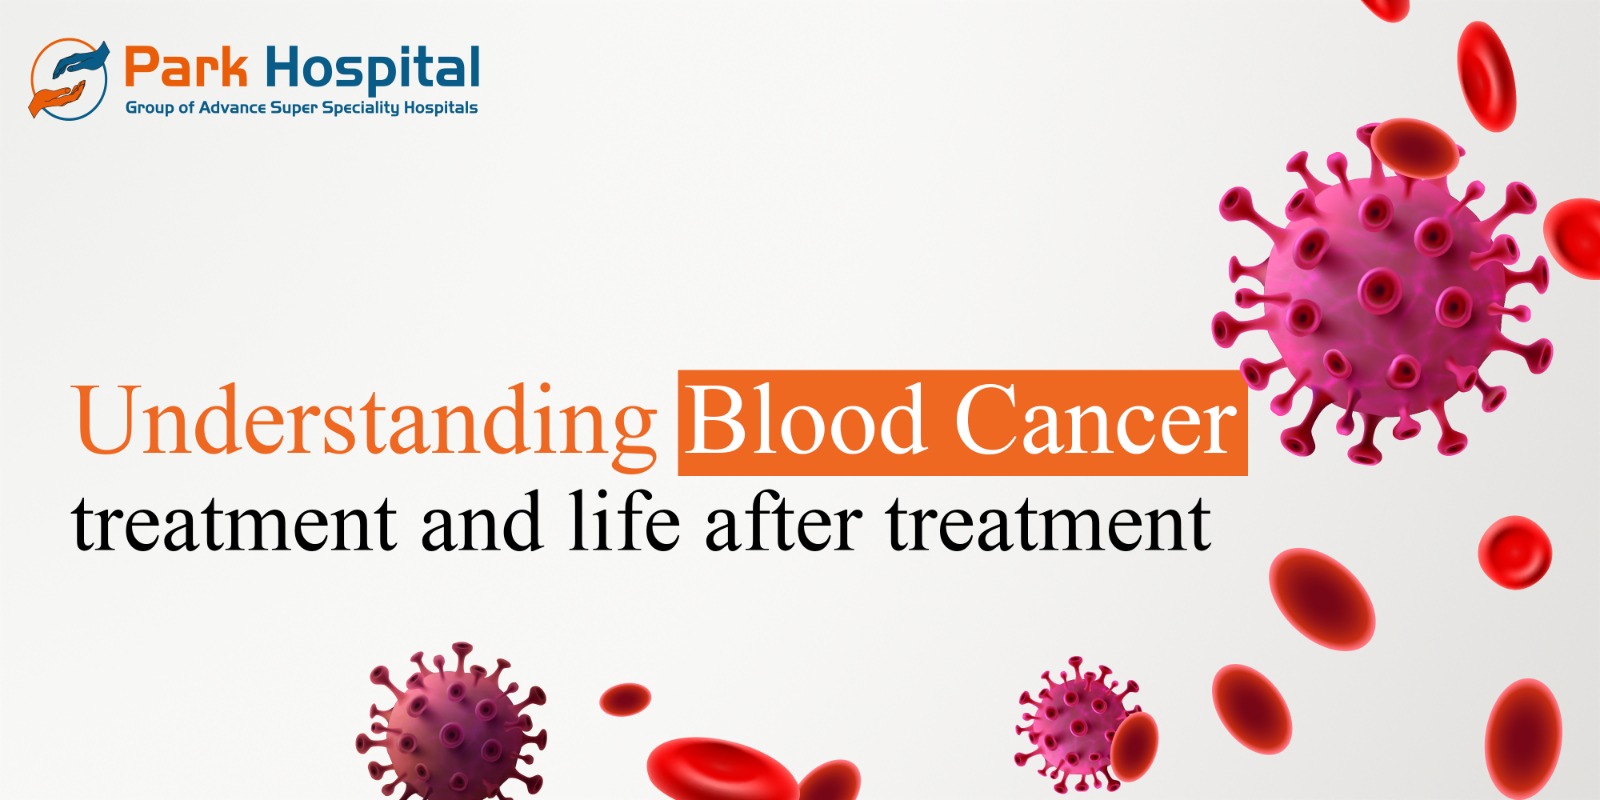 Understanding blood cancer, treatment and life after treatment.